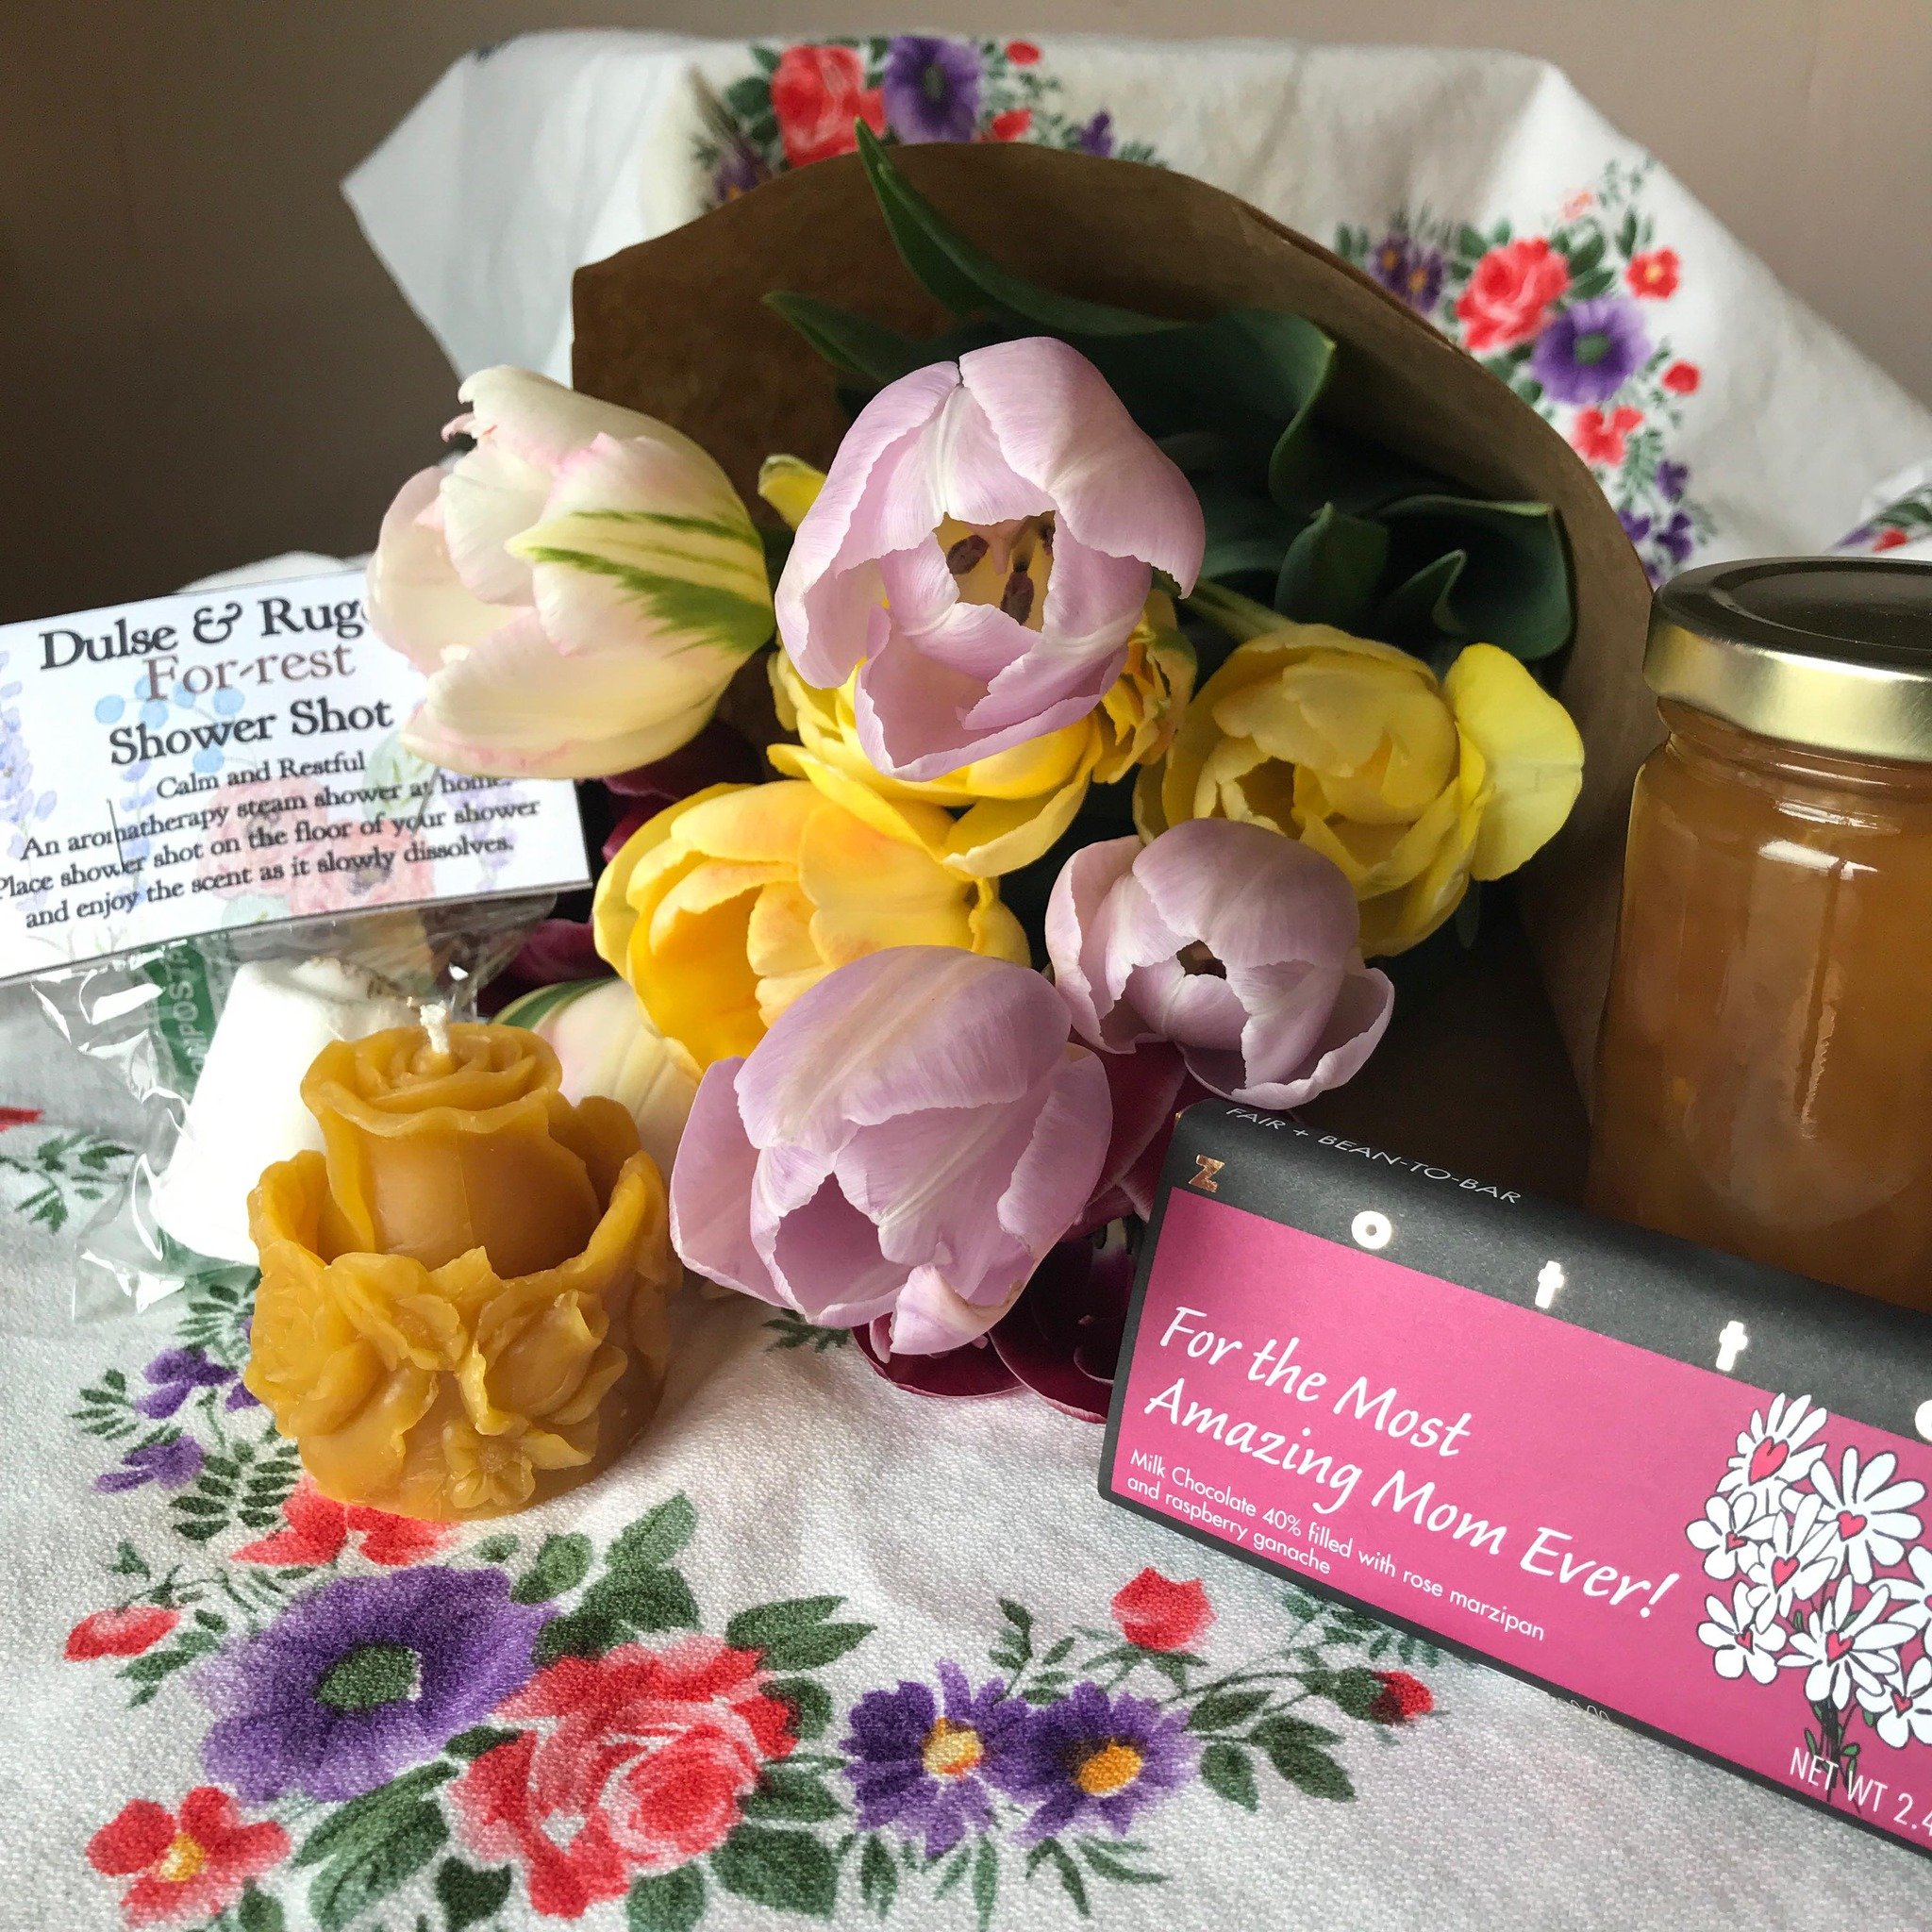 There&rsquo;s still time to order a Mother&rsquo;s Day gift package from us, but orders close Friday, May 3 so order soon! 

The gift is everything you see here, but packaged in a handled bag tied with ribbon: @easternriverfarm tulips, @zotterchocola